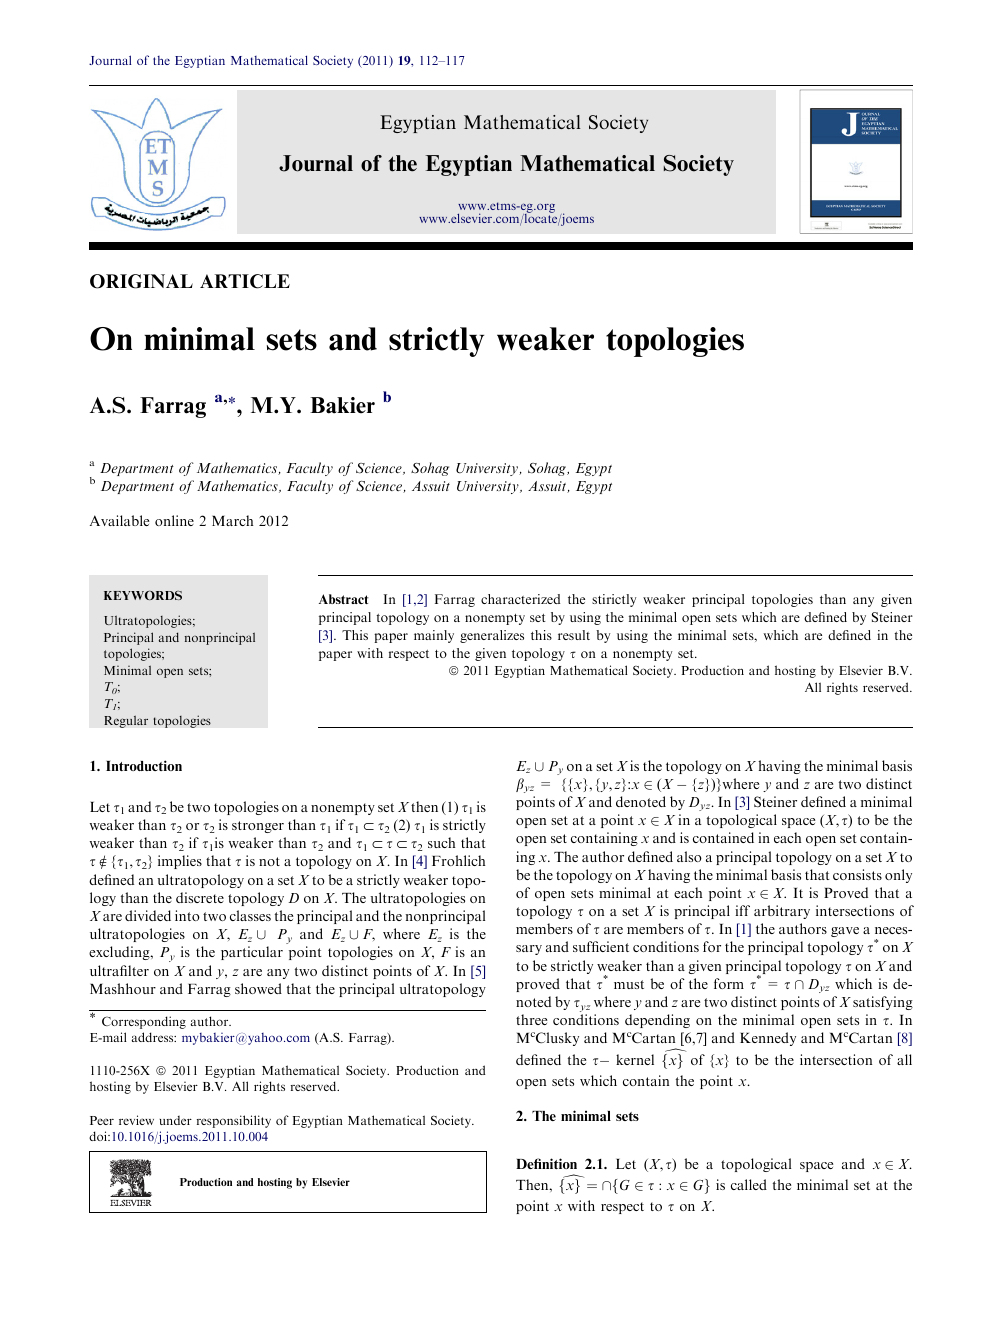 On Minimal Sets And Strictly Weaker Topologies Topic Of Research Paper In Mathematics Download Scholarly Article Pdf And Read For Free On Cyberleninka Open Science Hub